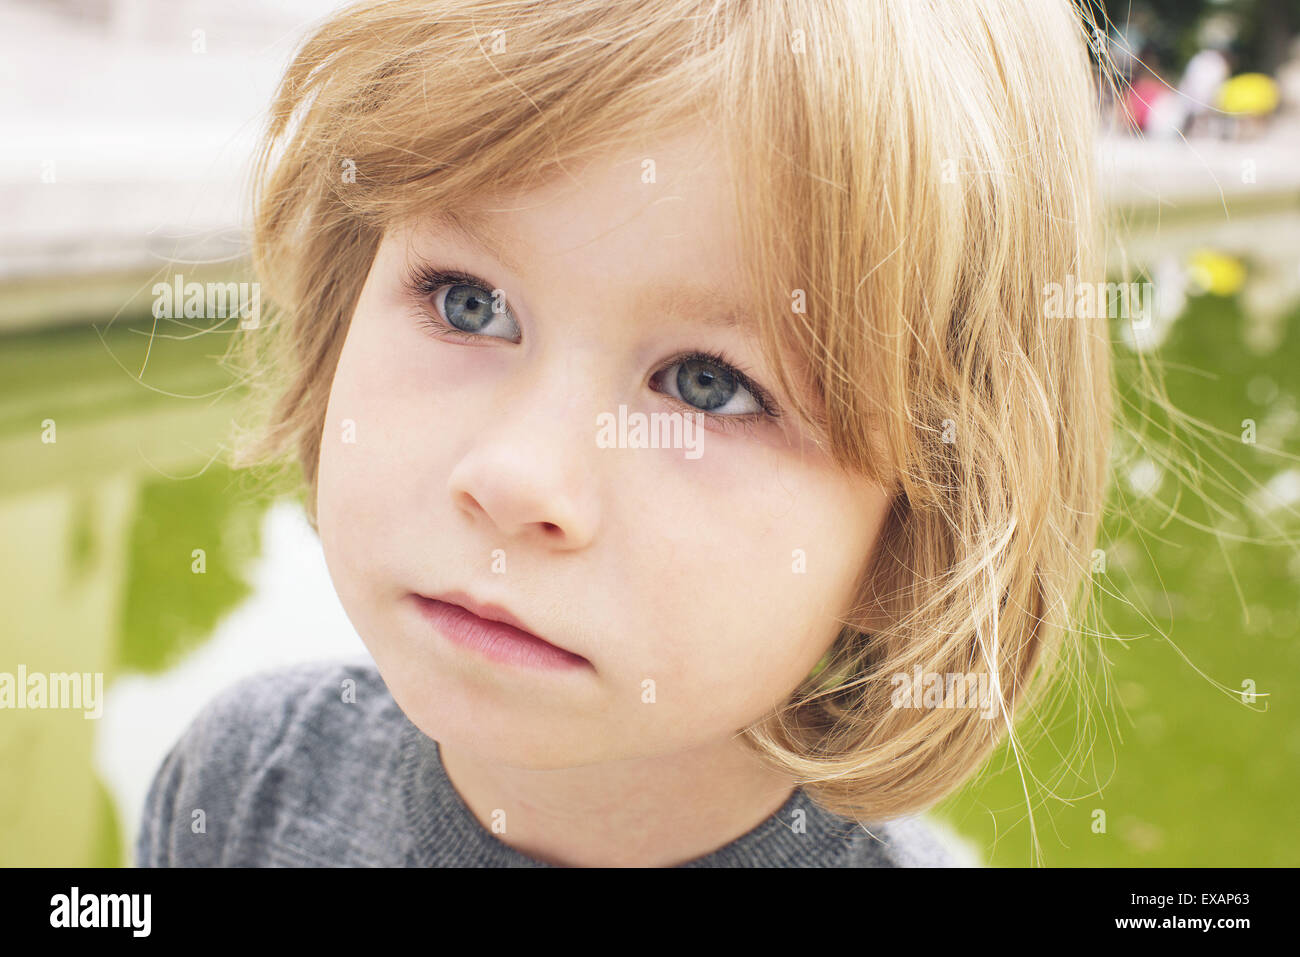 Little girl looking away in thought, portrait Stock Photo